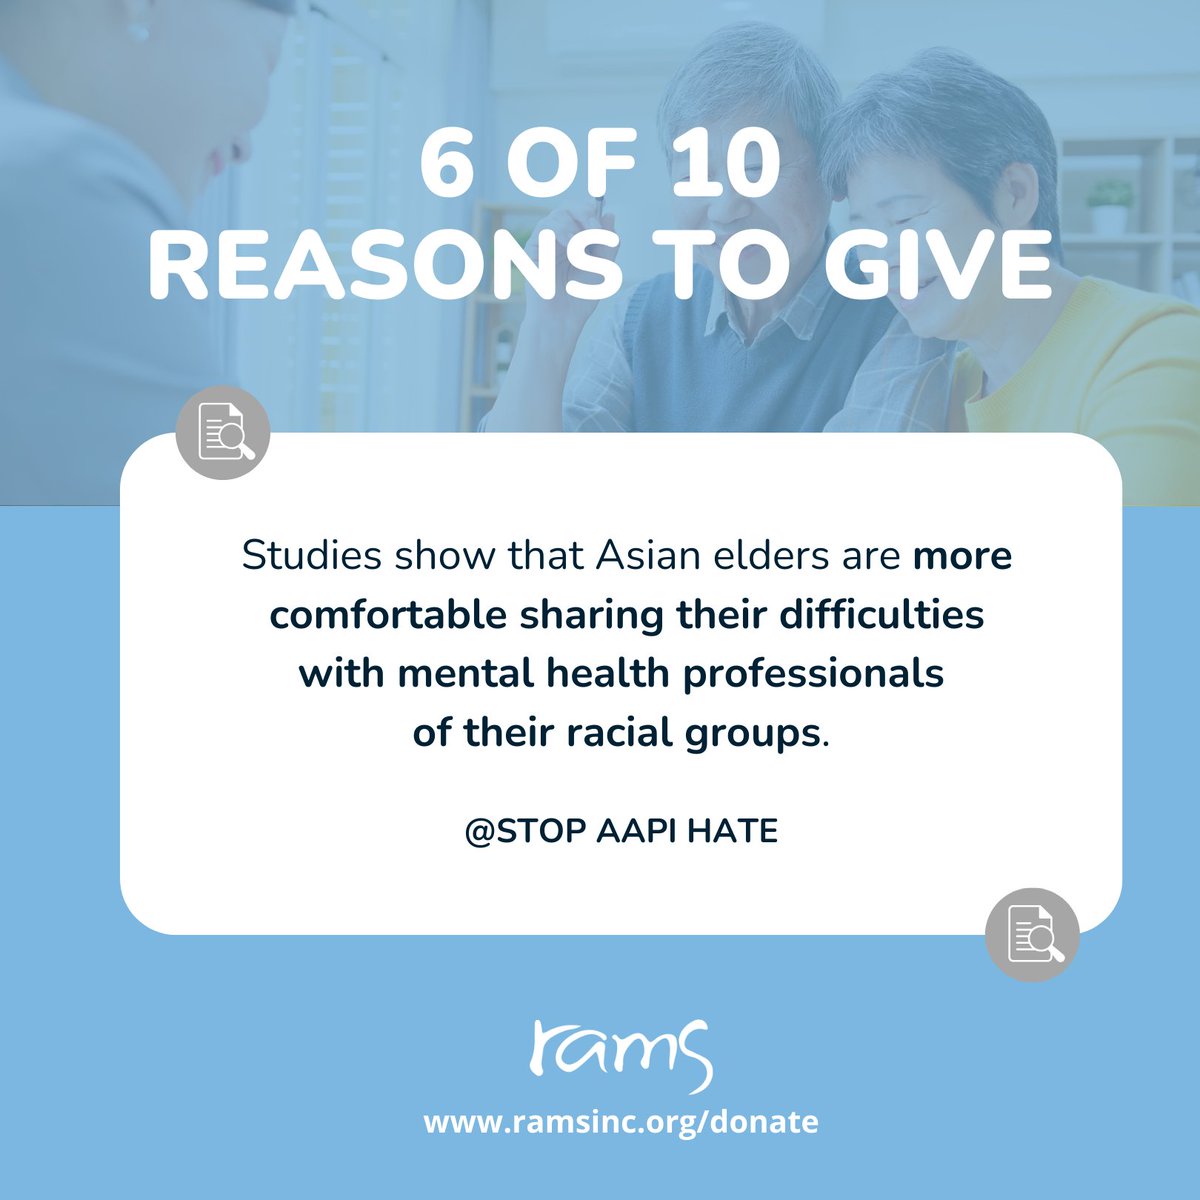 Day 6 of 10 Reasons to Give to RAMS: To address the need of multilingual consultation, we provide culturally-responsive mental health services in 33 languages. Your donations help people receive support from those who share similar experiences & cultures: ramsinc.org/donate